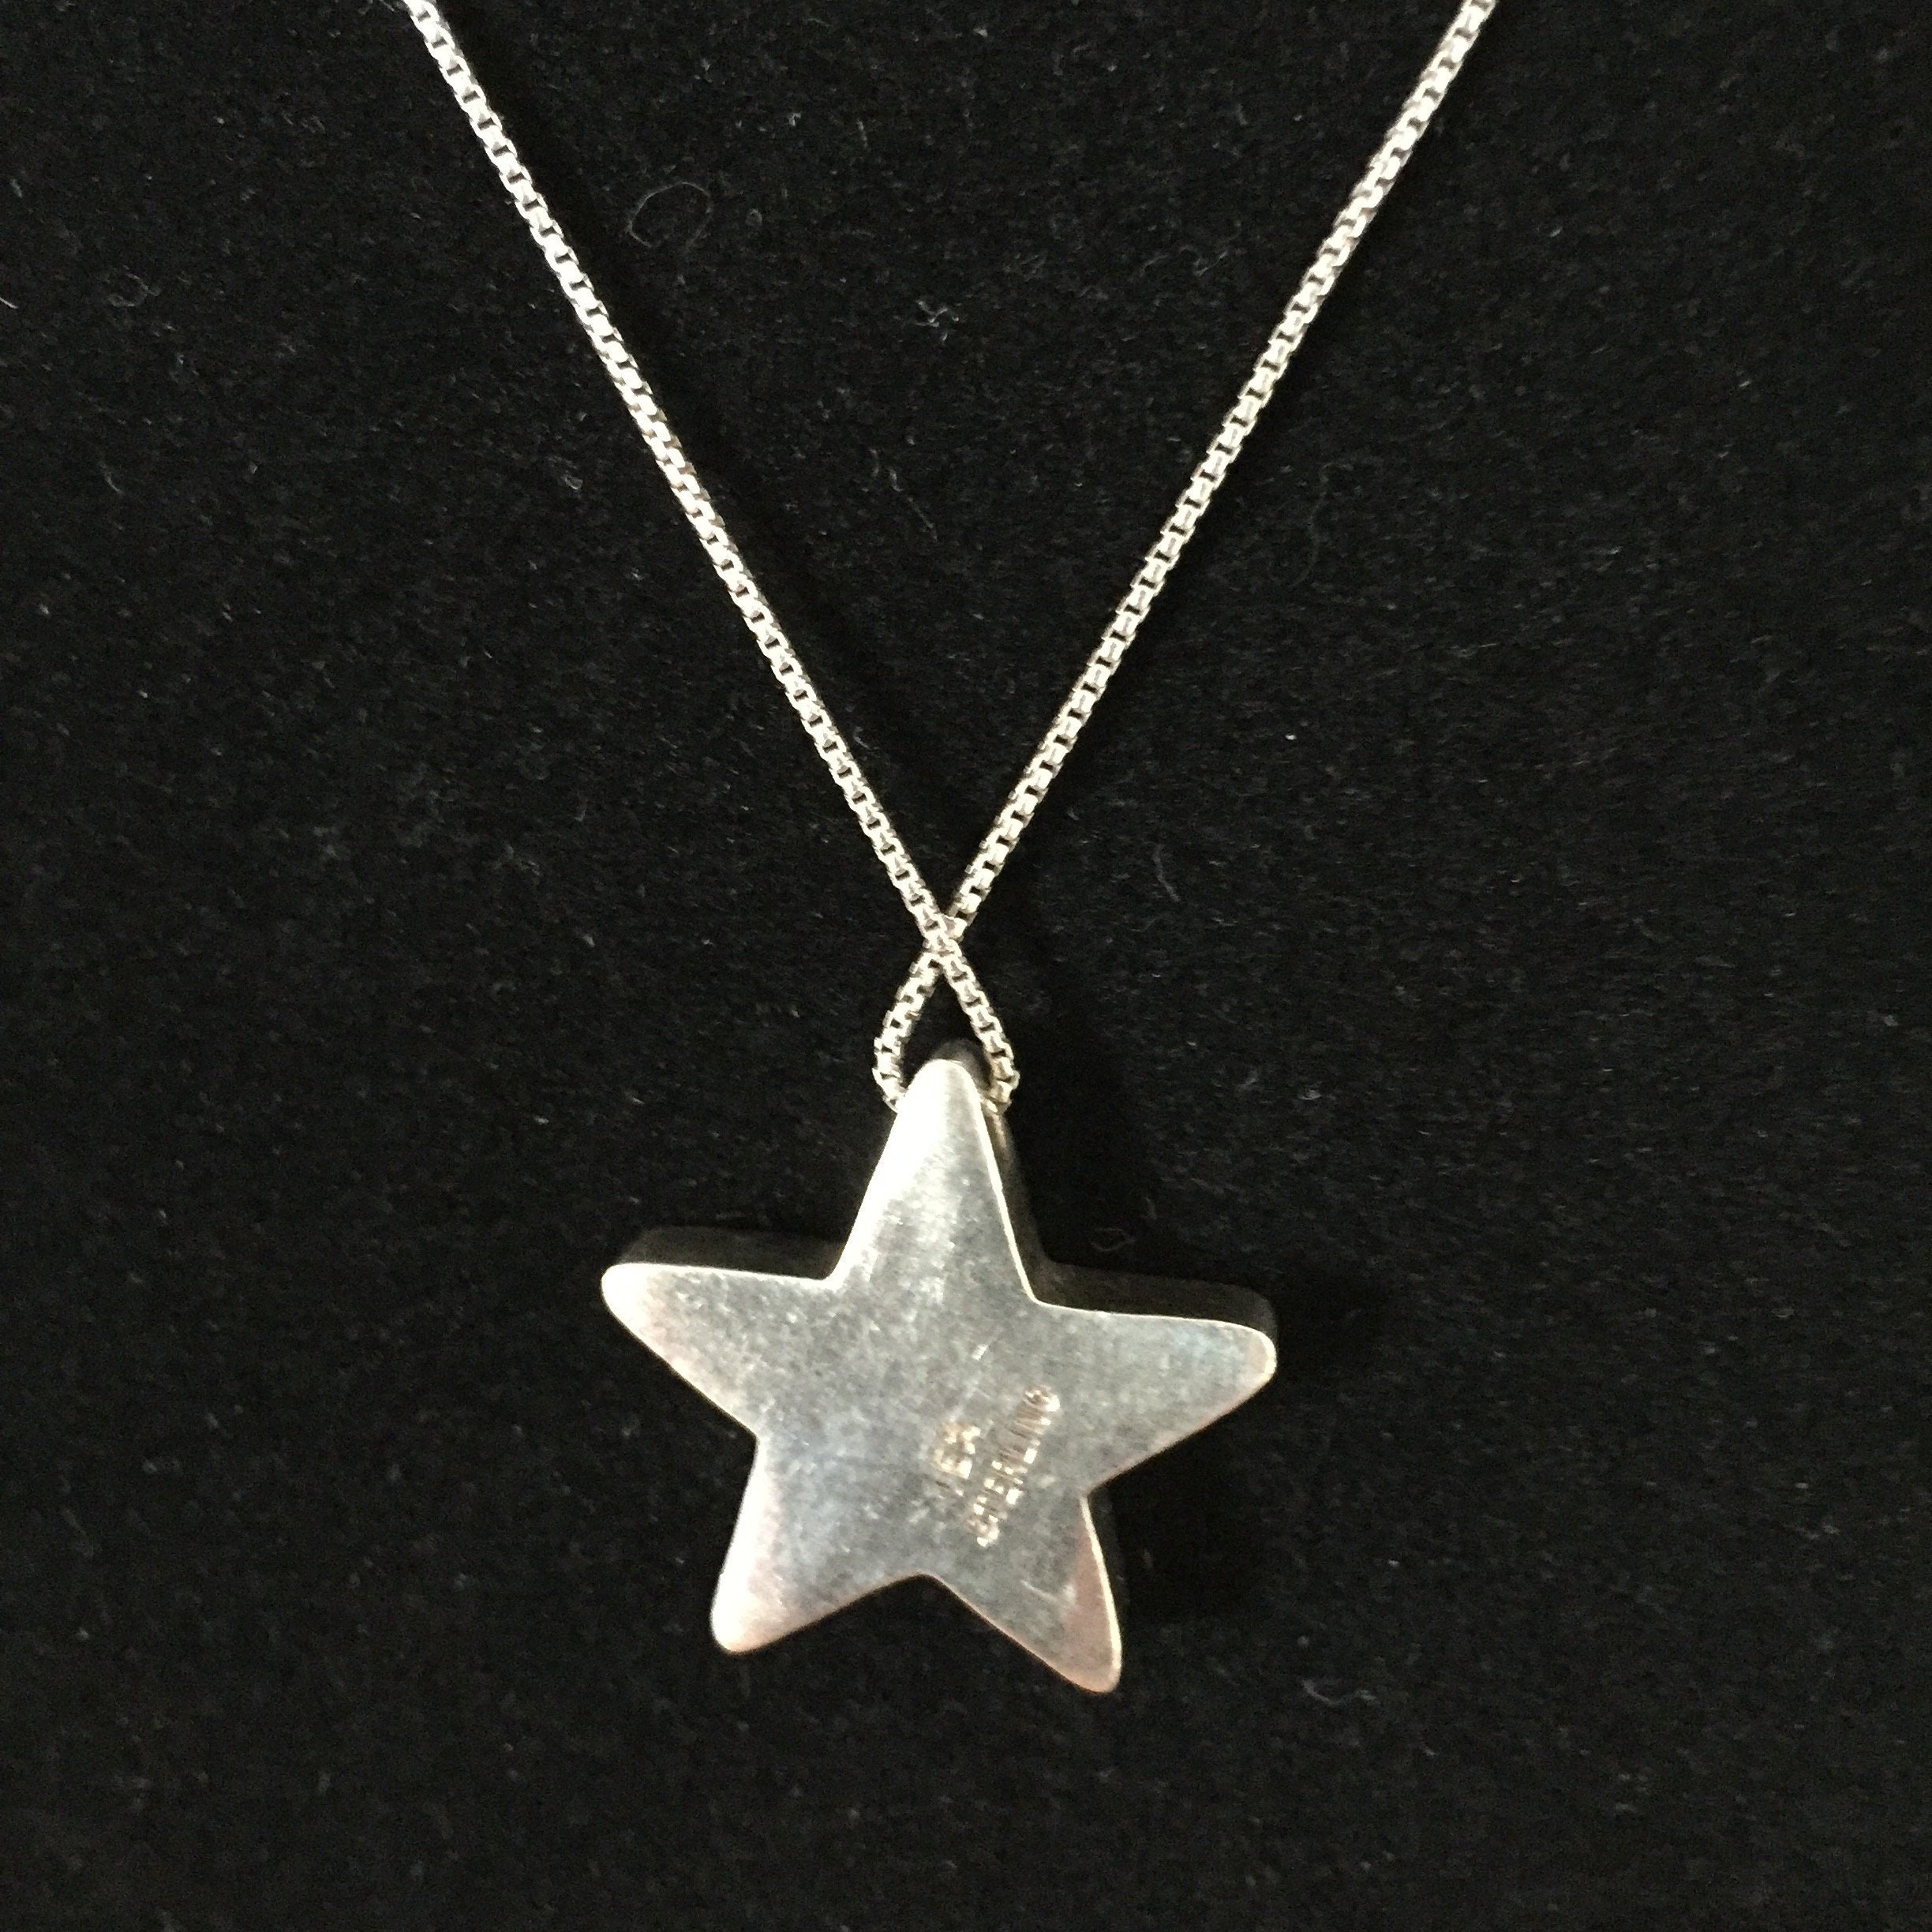 Star Pendant Necklace Sterling Star Pendant Star Jewelry | Etsy